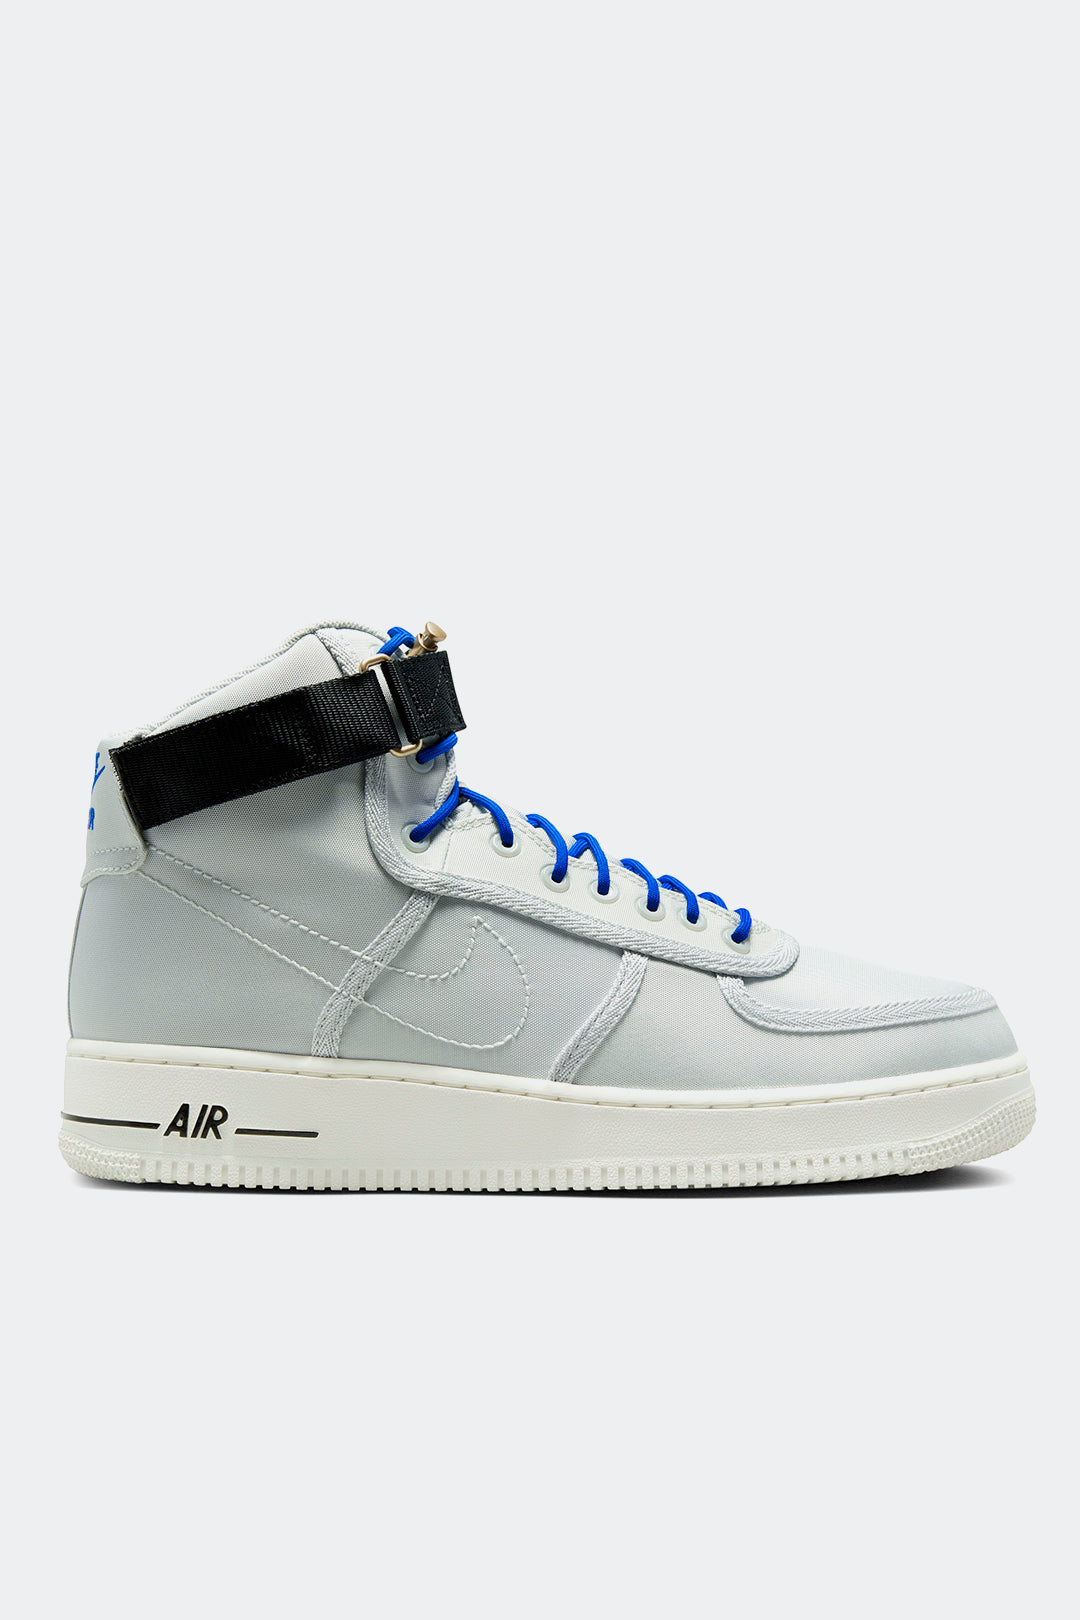 NIKE AIR FORCE 1 HIGH '07 LV8 "MOVING COMPANY" - HYPE